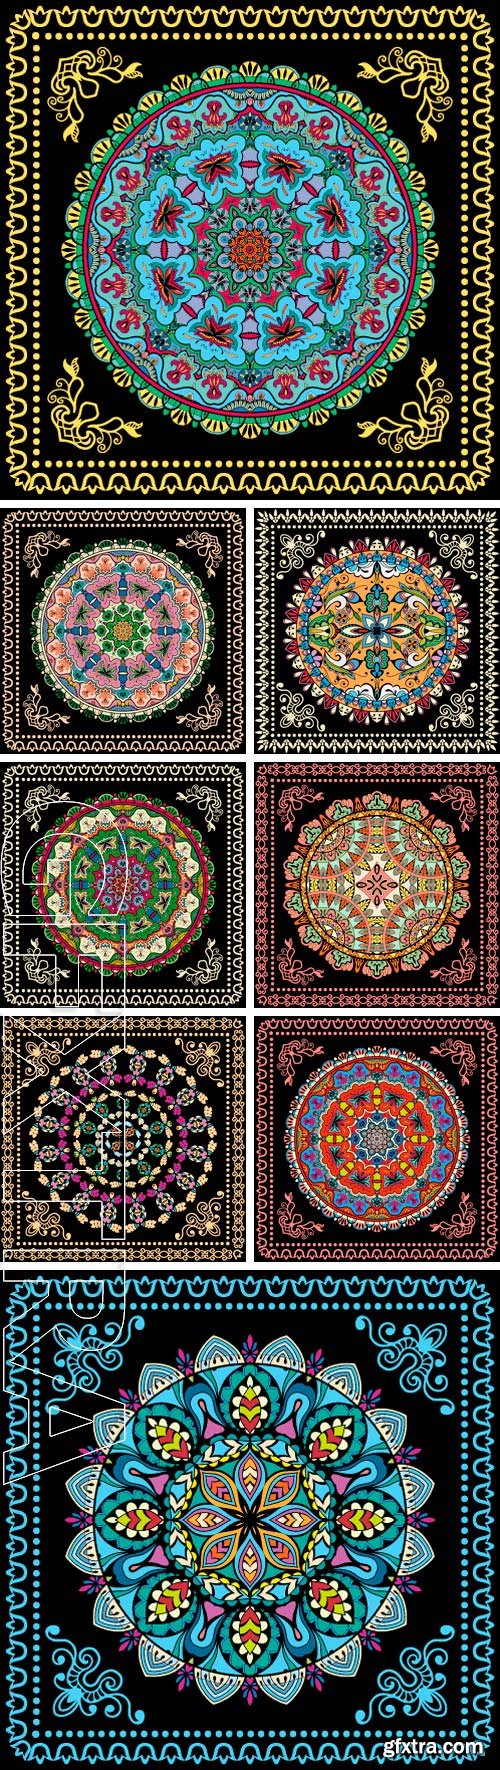 Stock Vectors - Bandana Print with Mandala ornament, silk neck scarf or kerchief square pattern design style for print on fabric, abstract geometric background